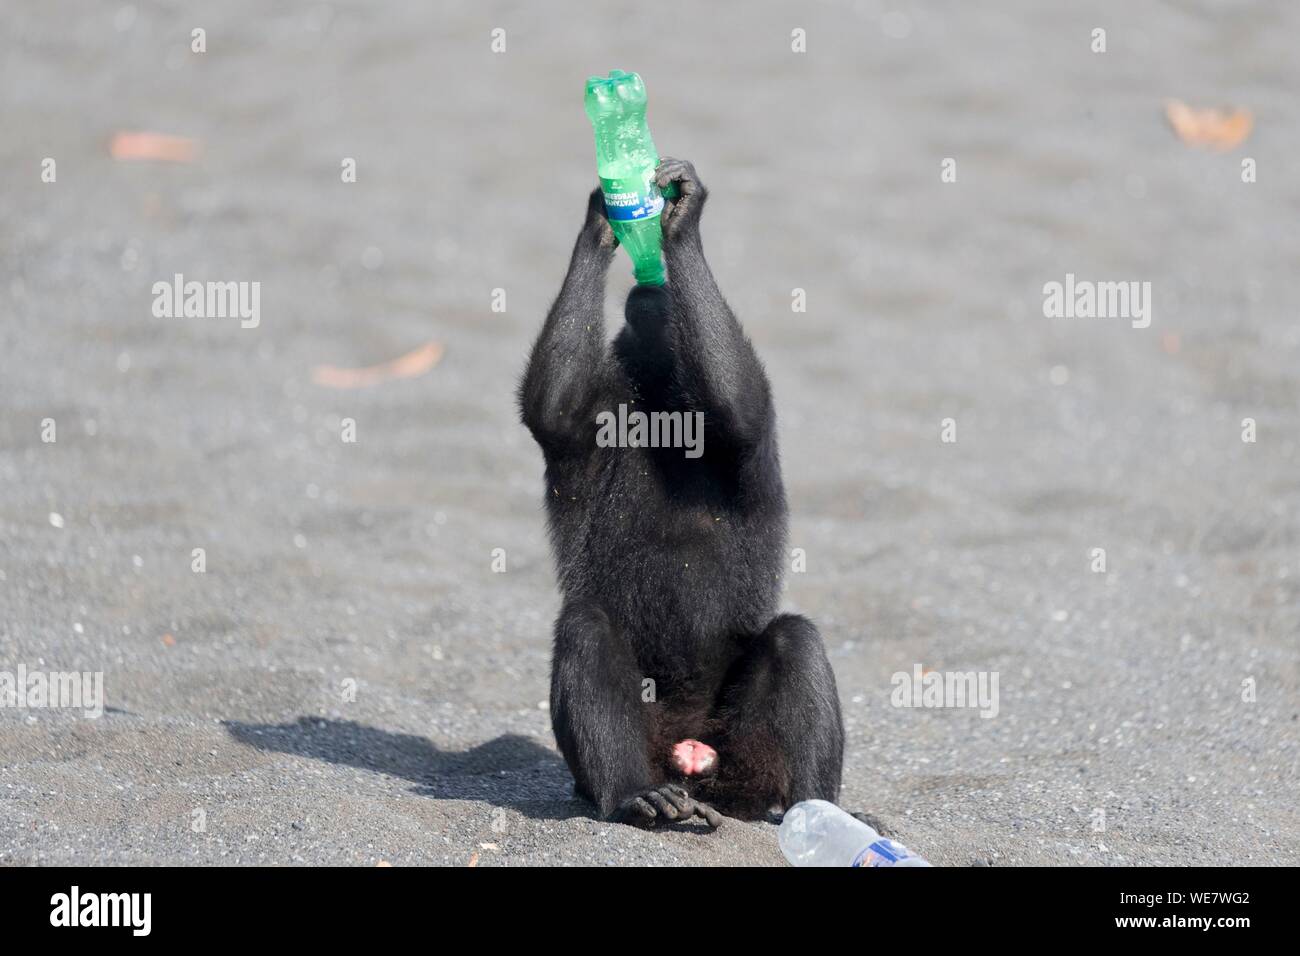 Indonesia, Celebes, Sulawesi, Tangkoko National Park, Celebes crested macaque or crested black macaque, Sulawesi crested macaque, or the black ape (Macaca nigra), on the black sand beach with a bottle of soda Stock Photo